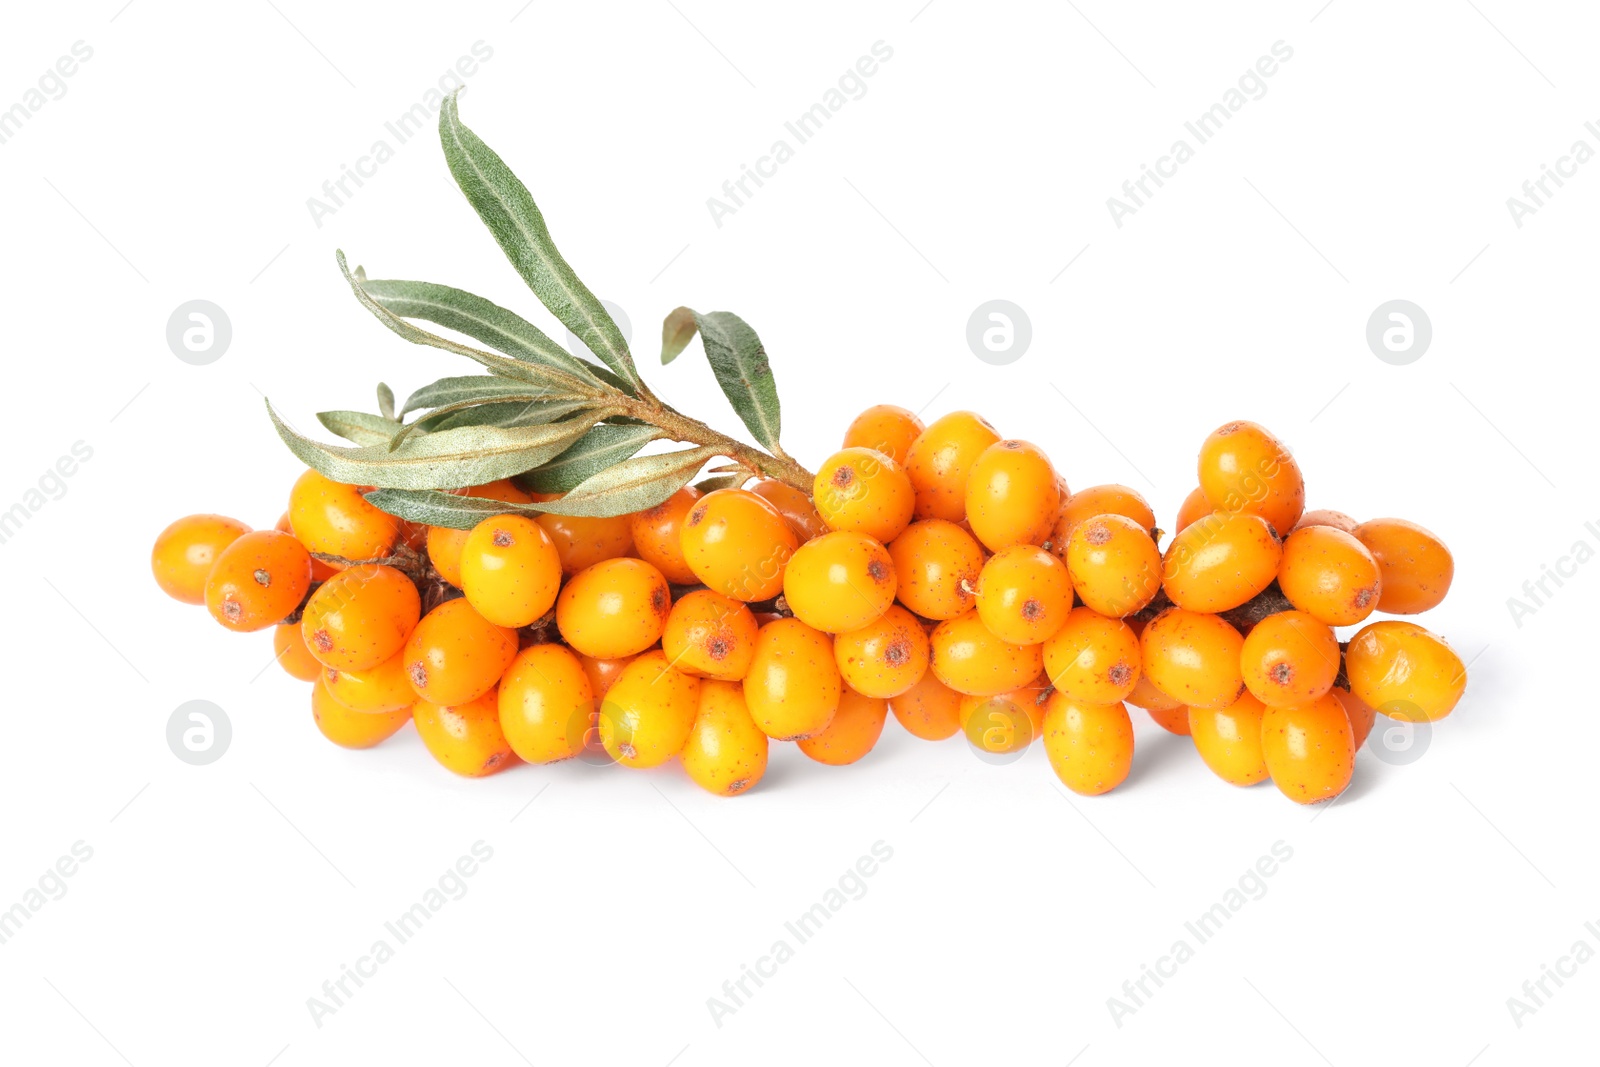 Photo of Sea buckthorn branch with ripe berries and leaves on white background